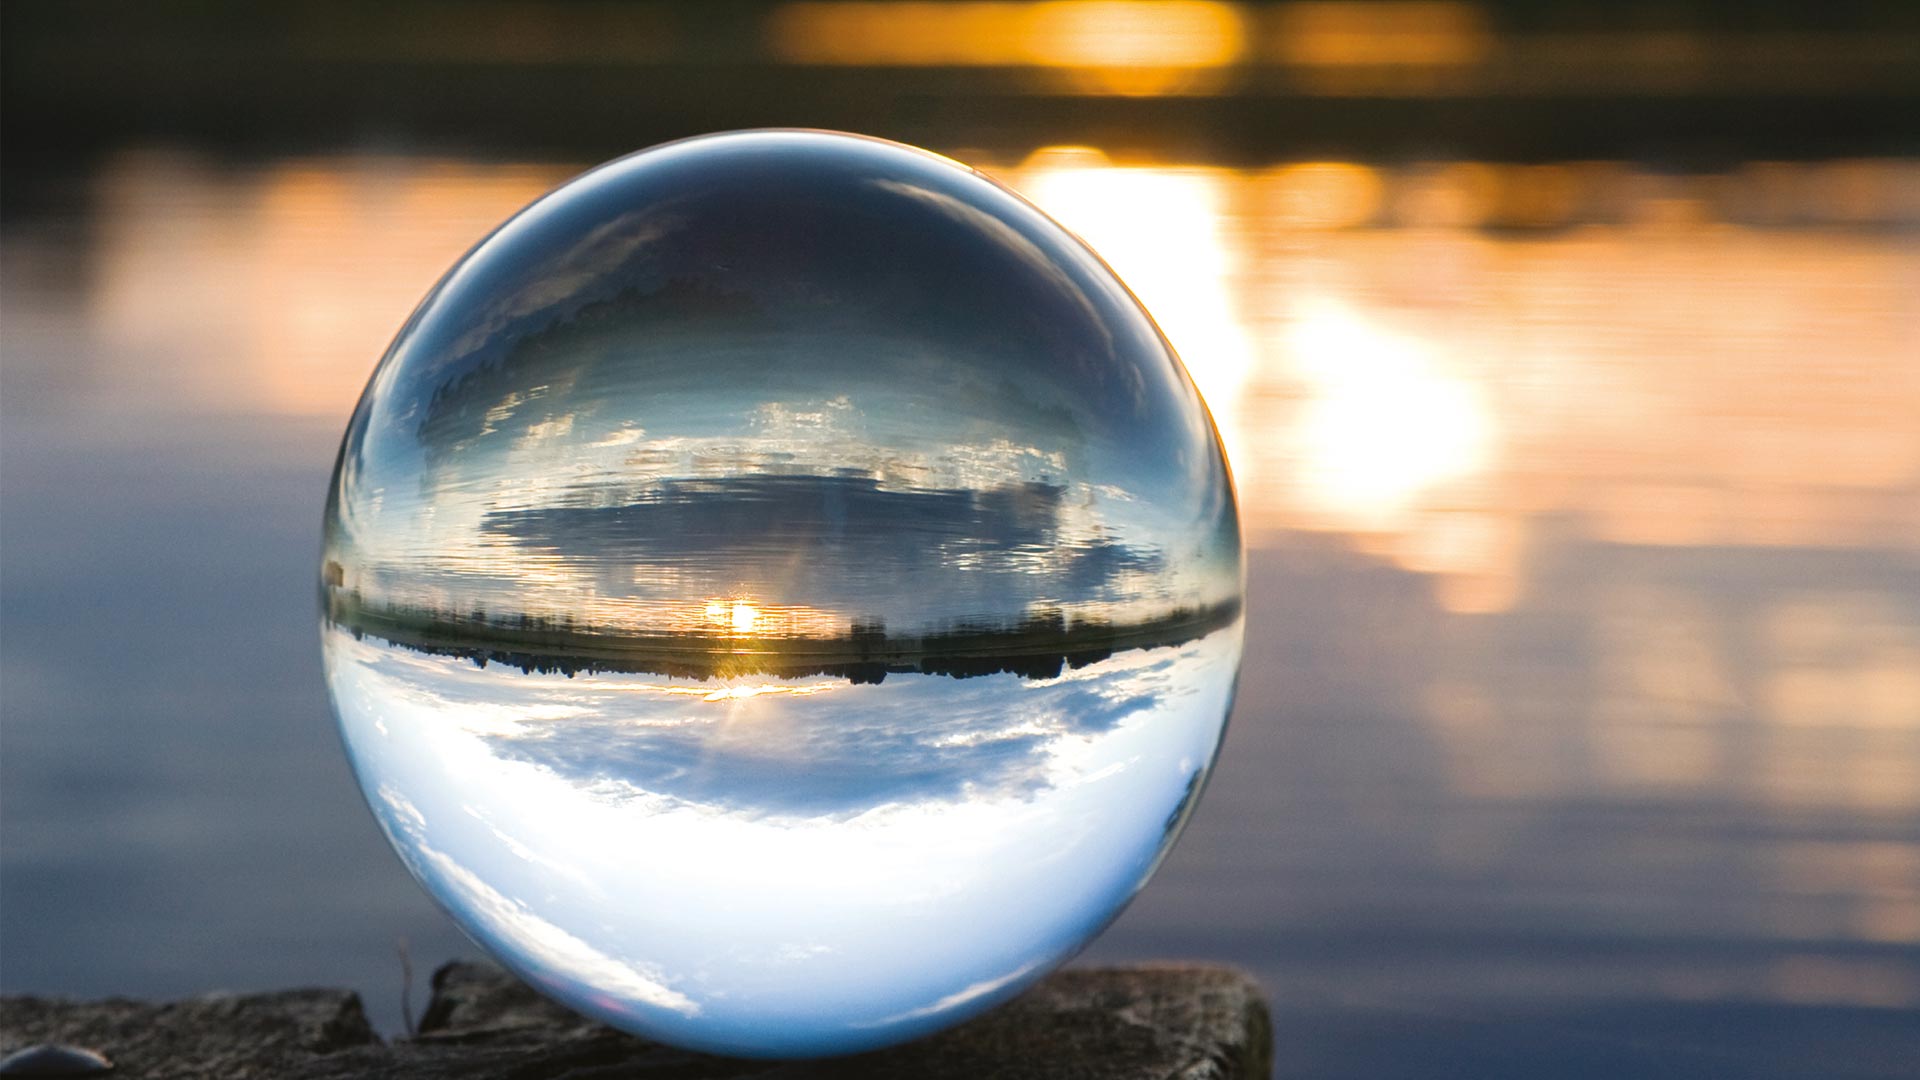 Glass ball looking out over a lake at sunset